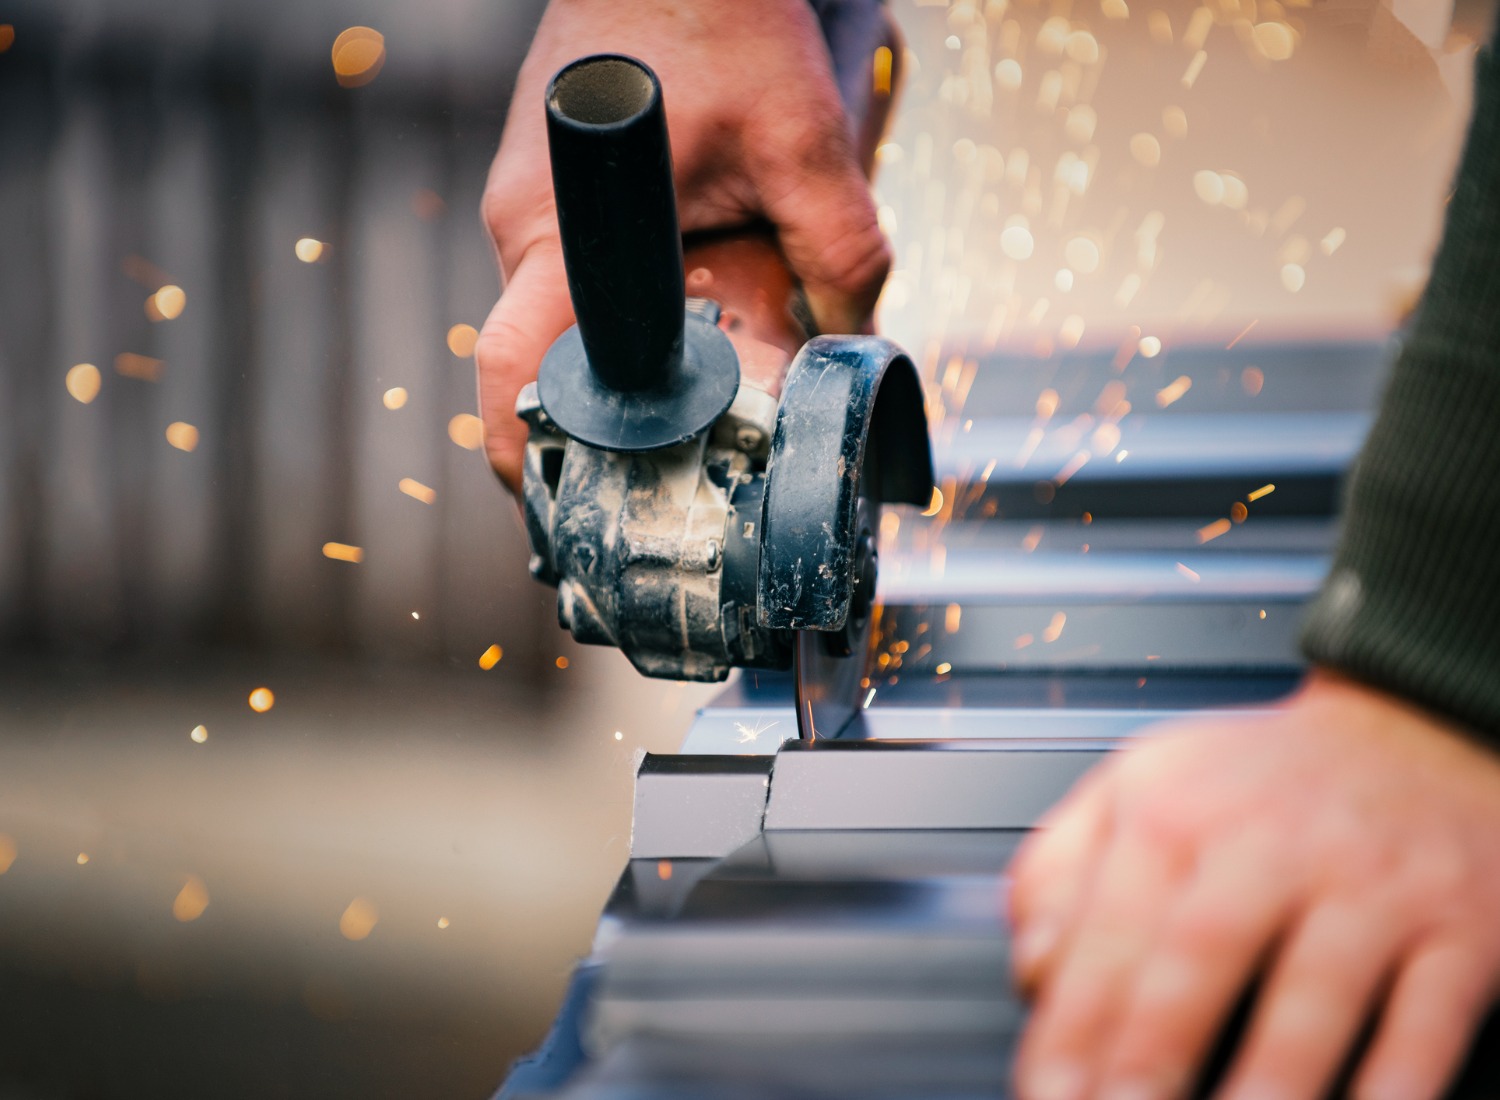 How to Cut Metal: 5 Tools You Can Safely Use for Metalworking